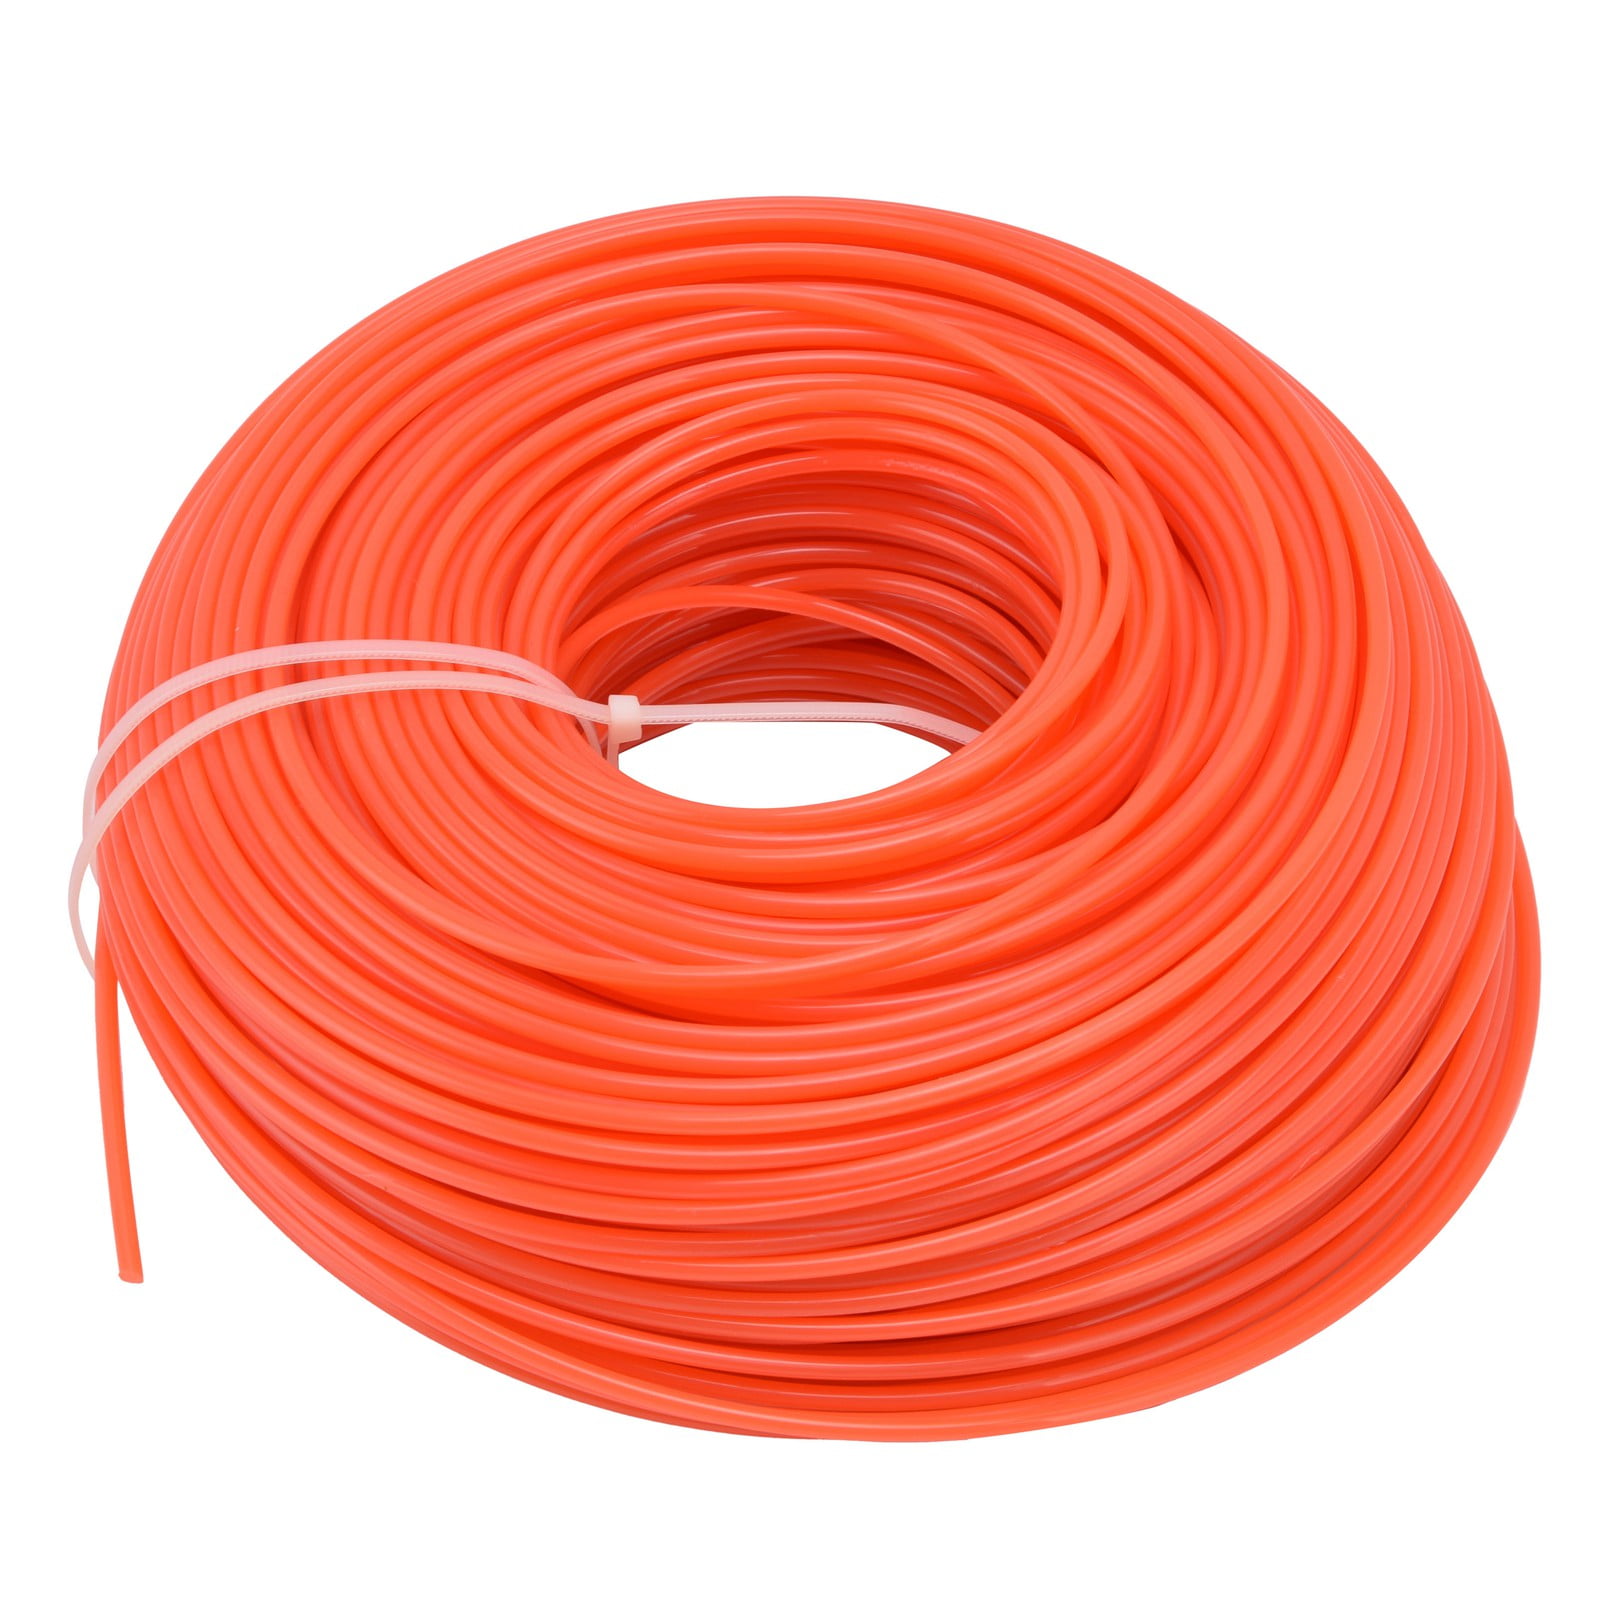 5lb .095/ 2.4mm Round Commercial Trimmer Line Spool for Stihl 25-2